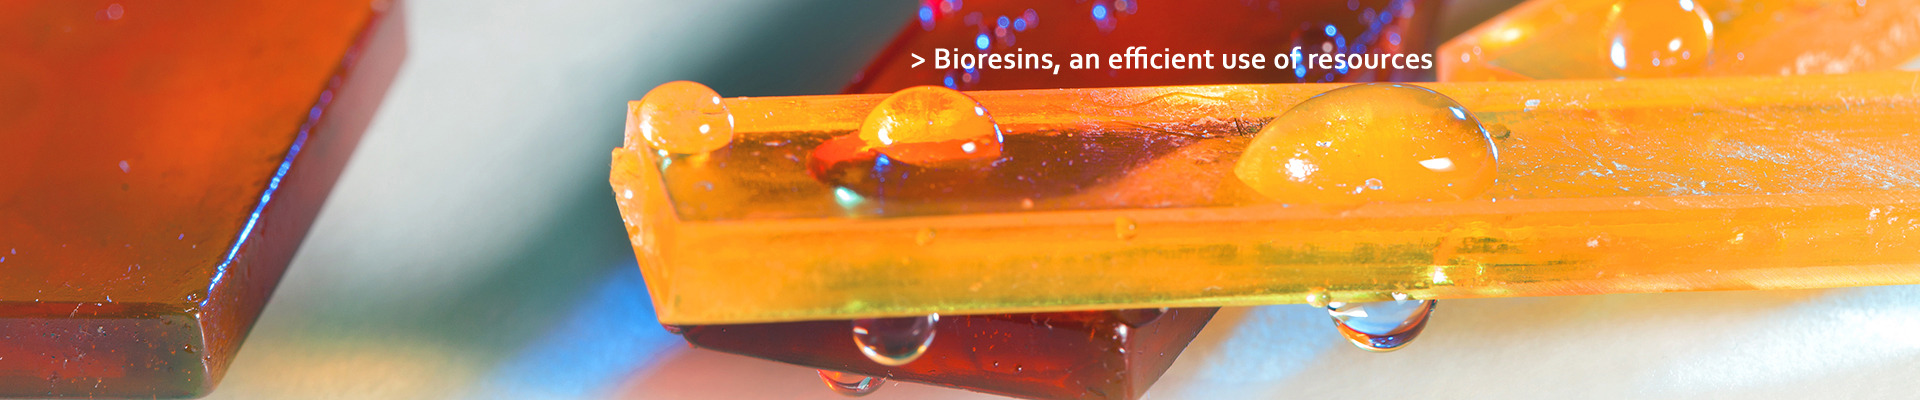 Bioresins: an efficient use of resources